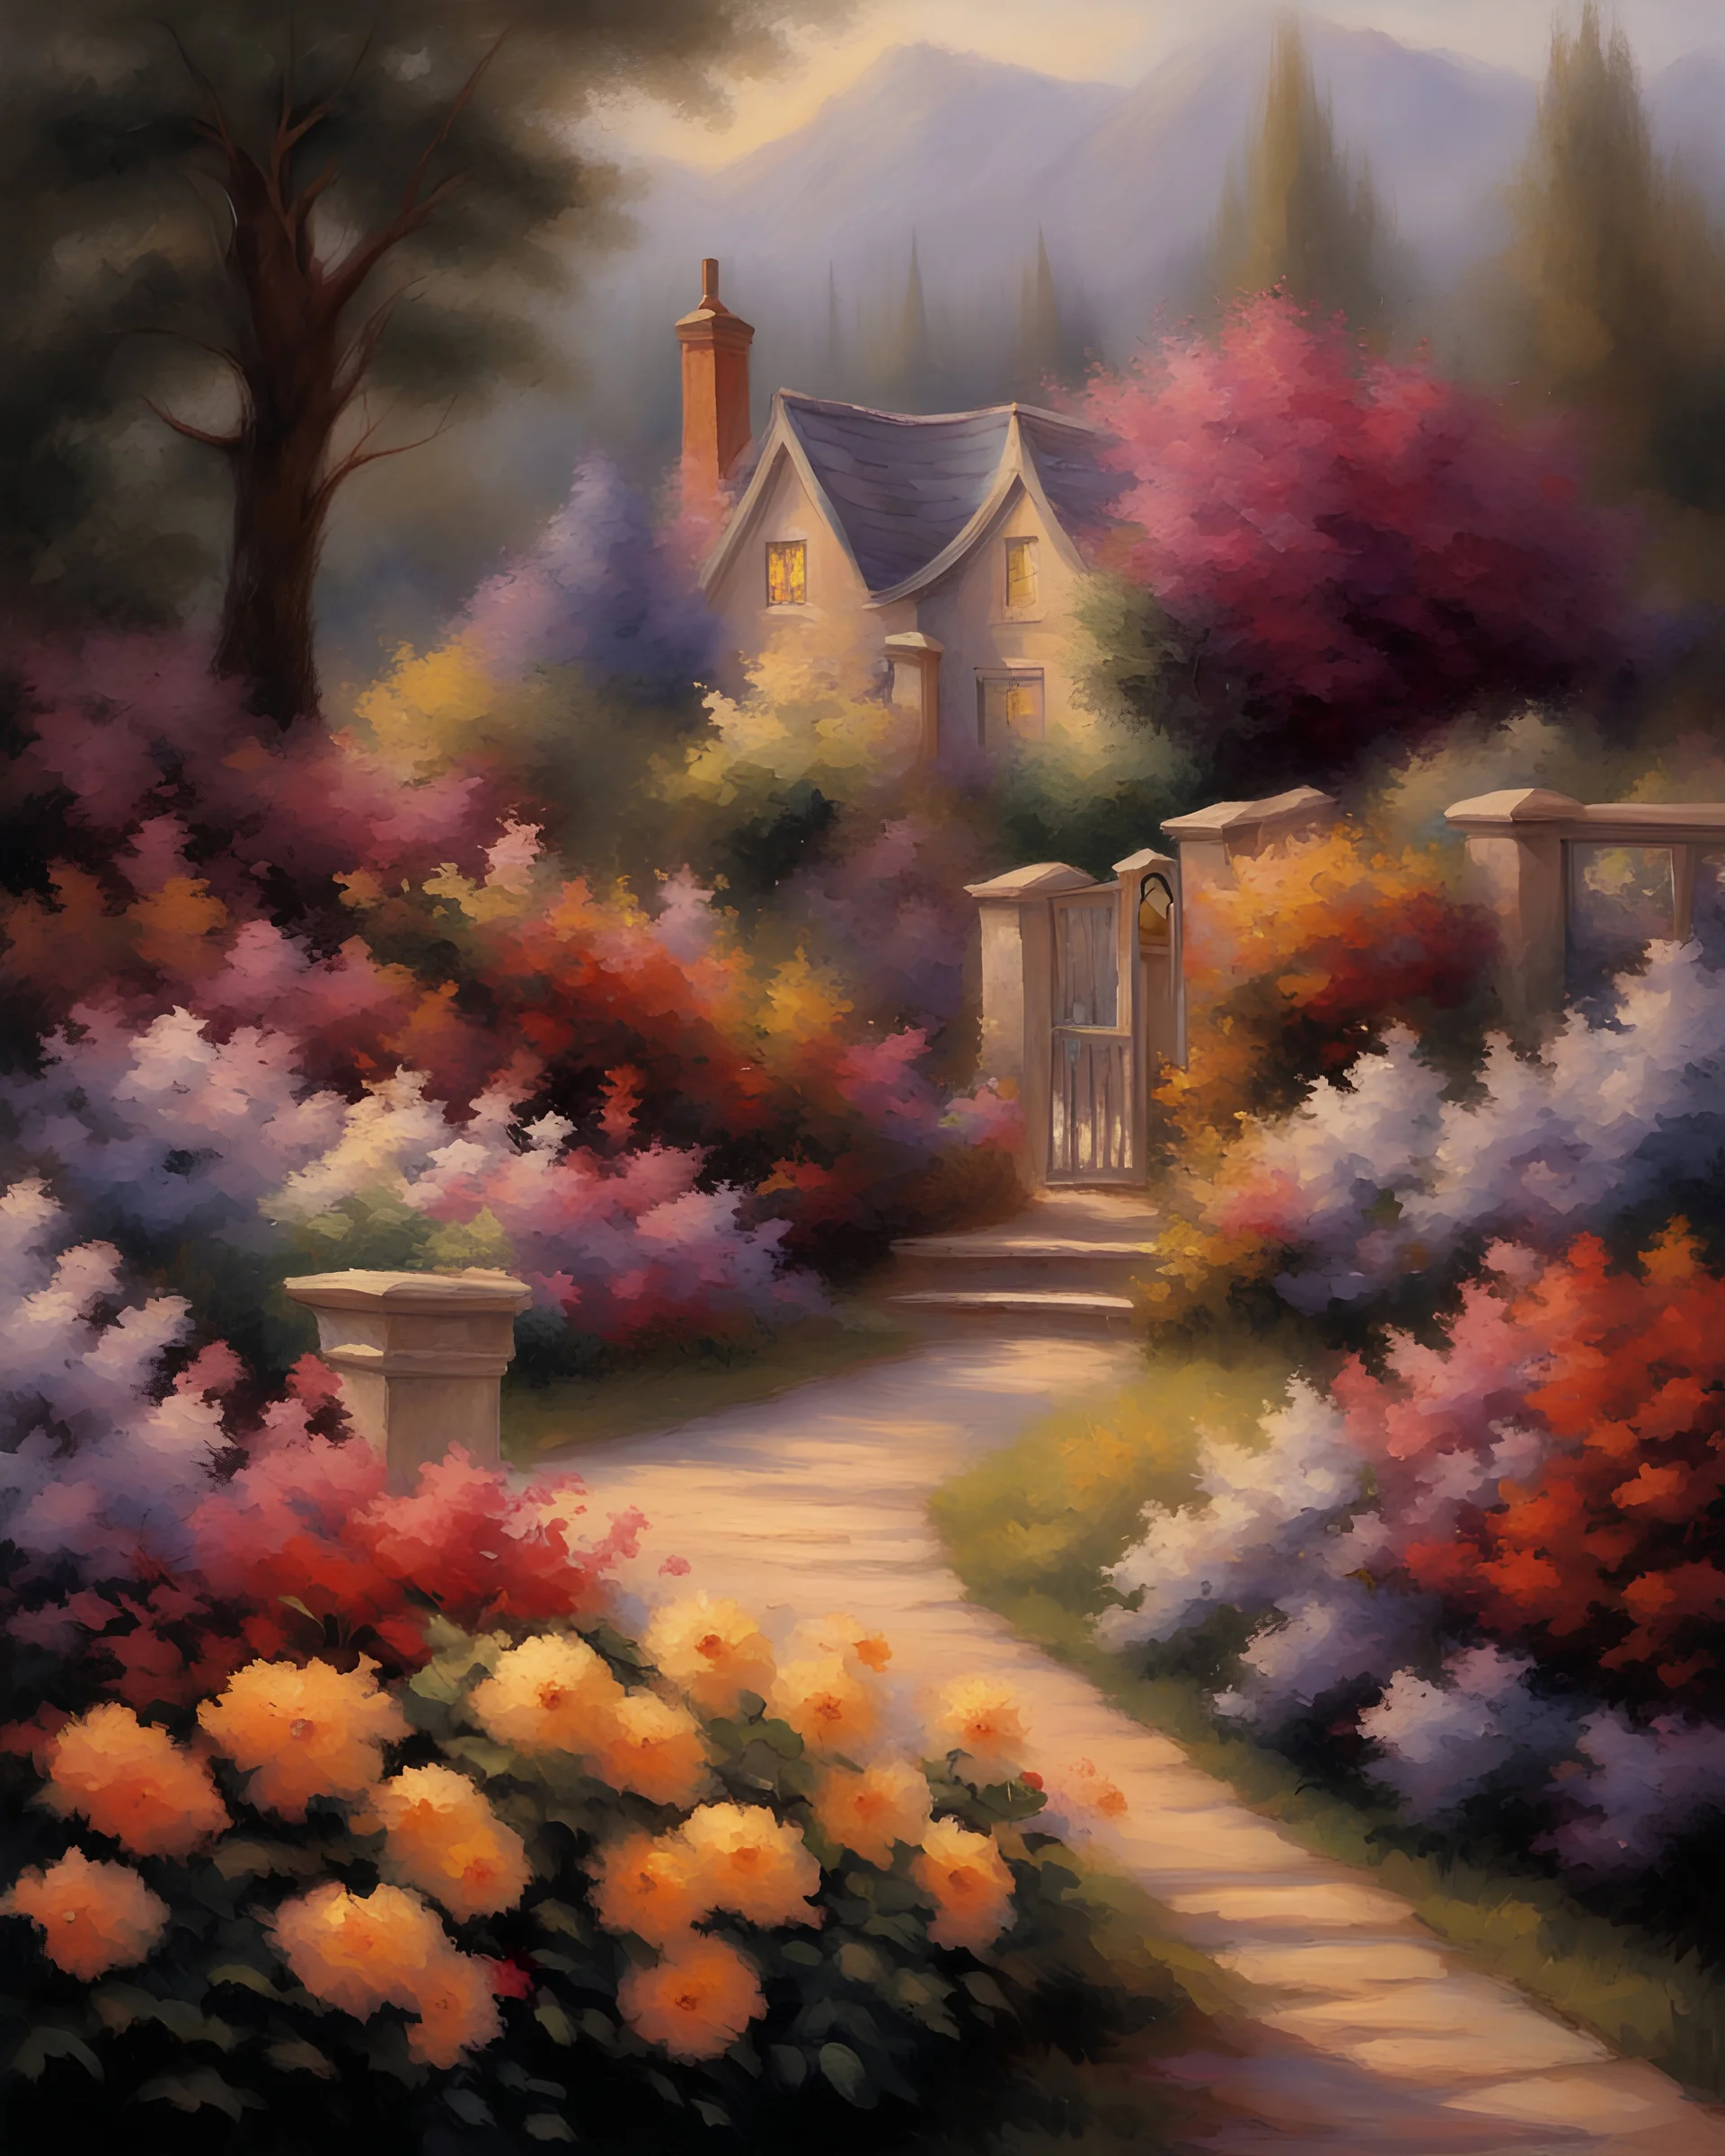 Painting of beautiful flowers, oil painting, by Thomas Kinkade, garden in background, impressionism, beautiful painting, oil painting on canvas, vibrant oil painting, flower painting, fine art, high quality